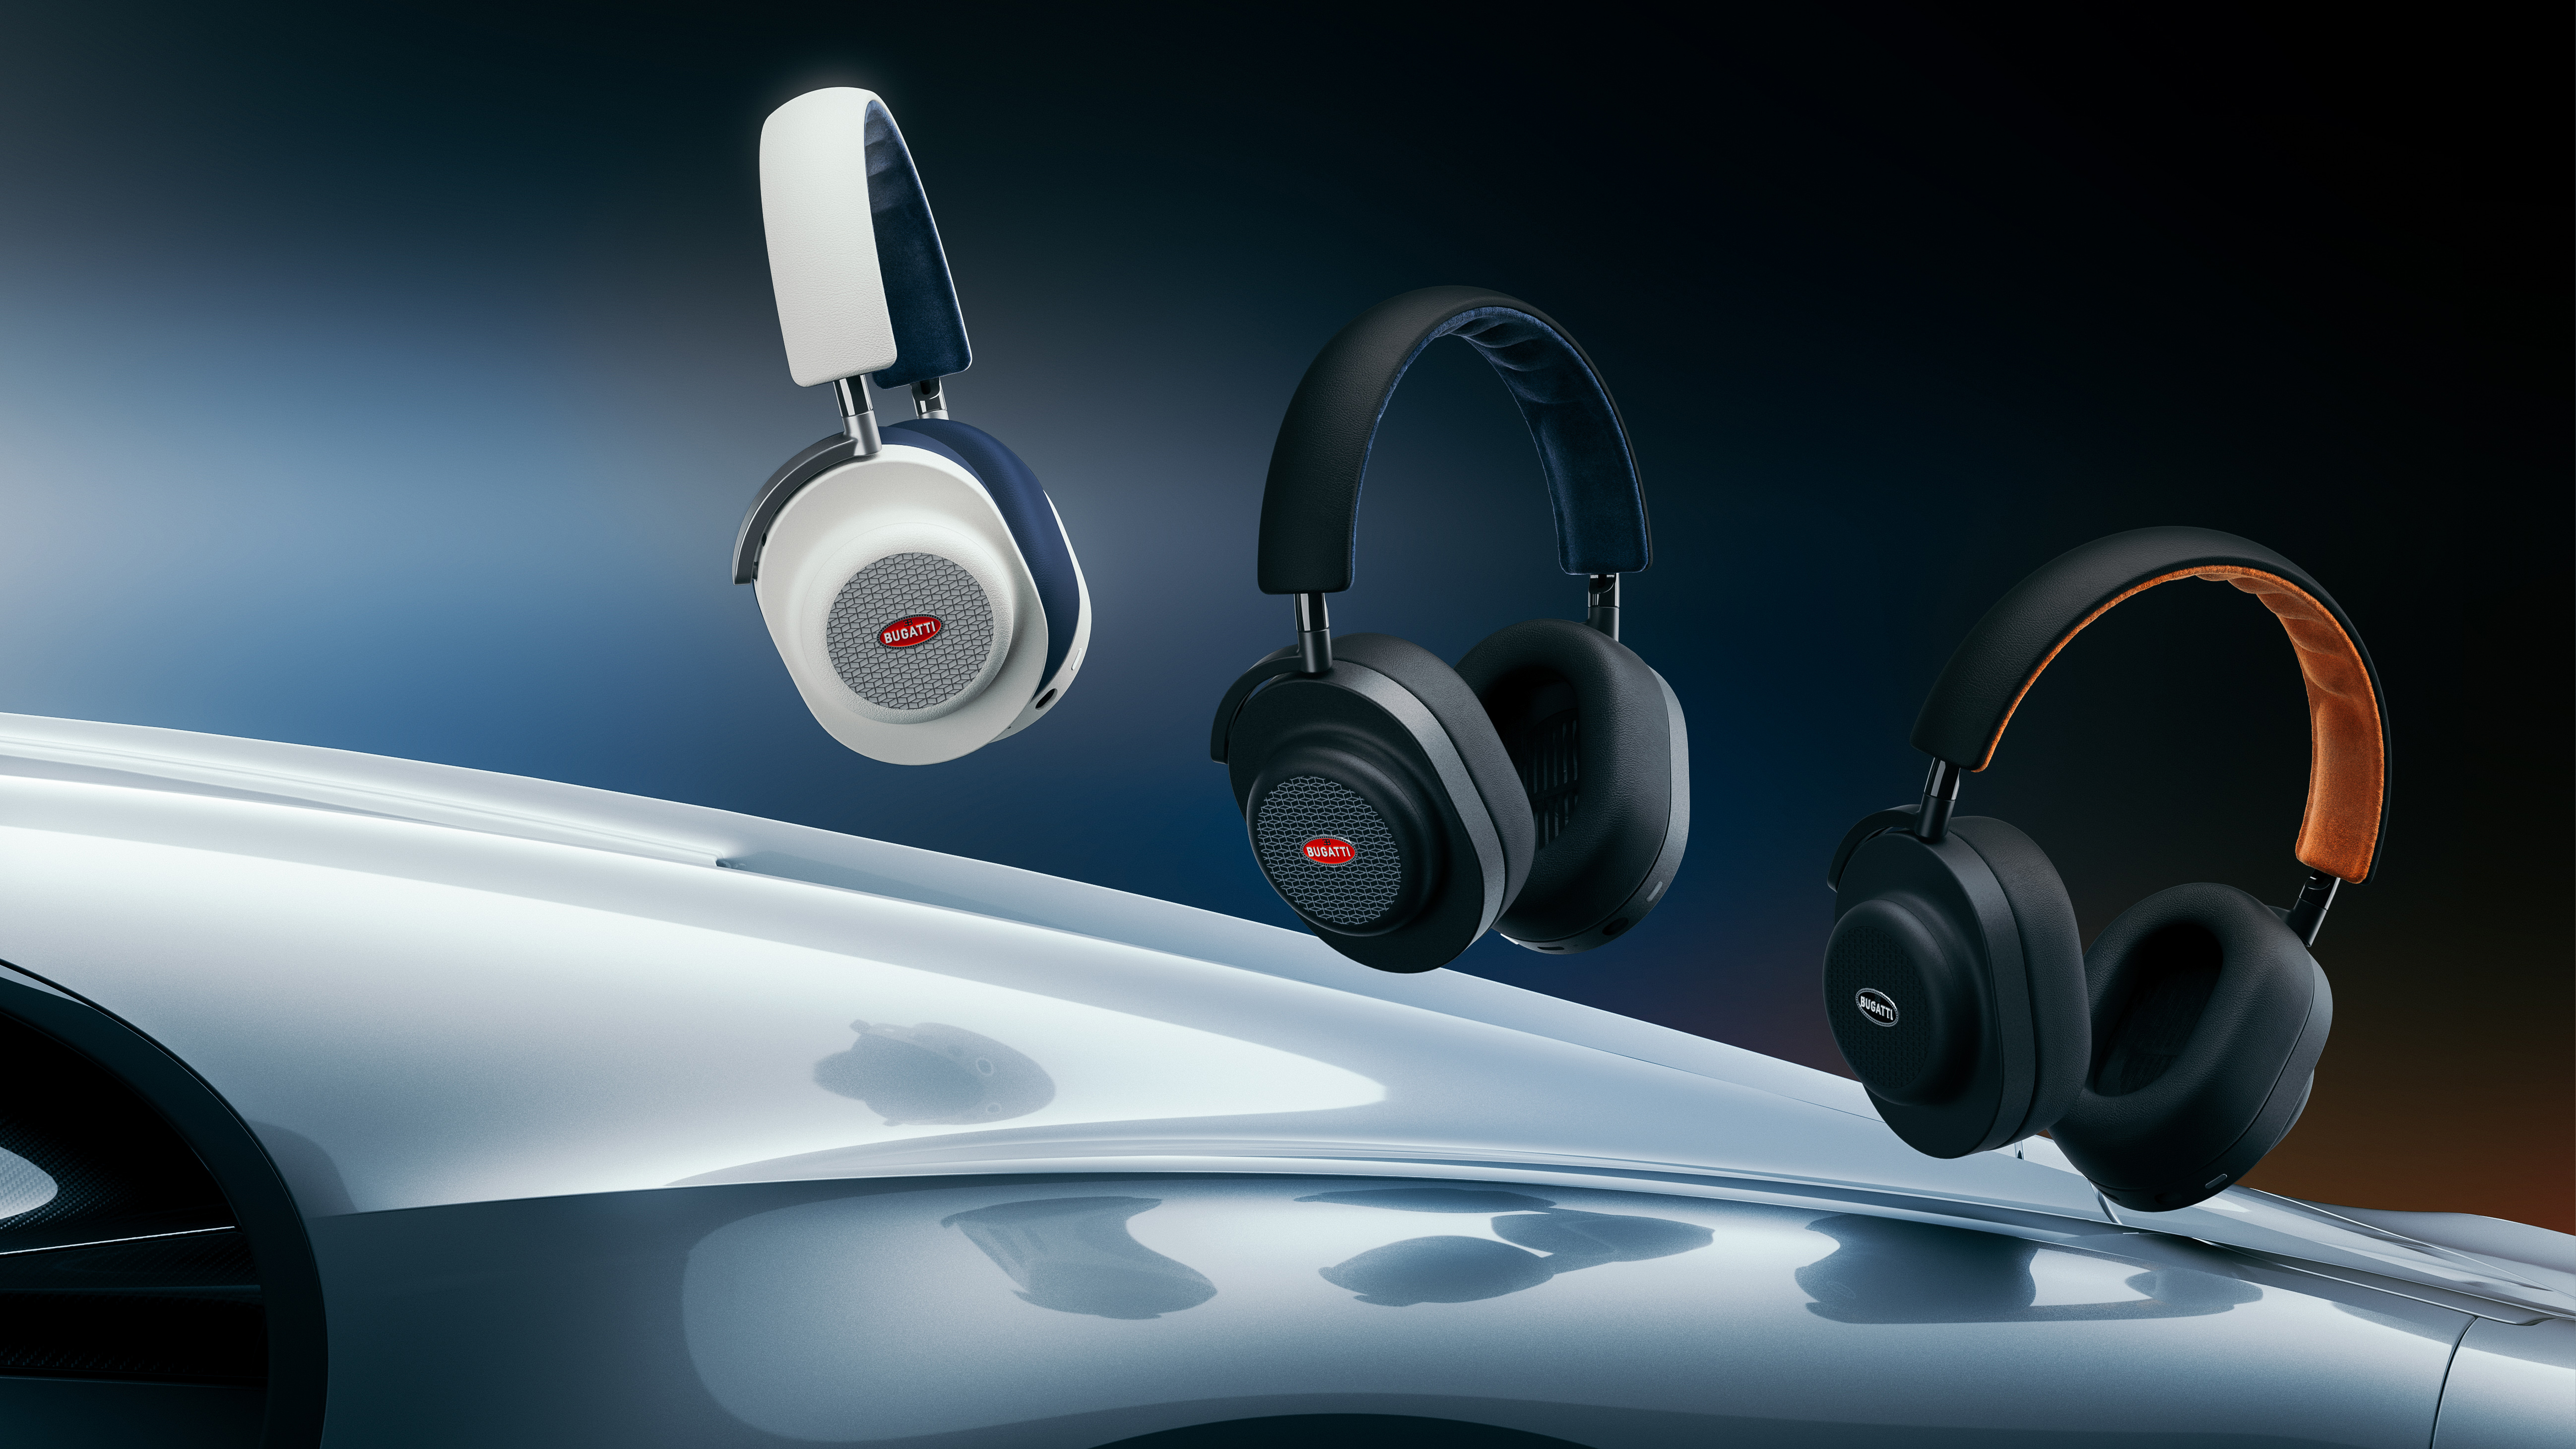 The MG20 Wireless Gaming Headphones for Bugatti in Blanc / Deep Blue, Nocturne / Lake Blue, and Nocturne / Jet Orange